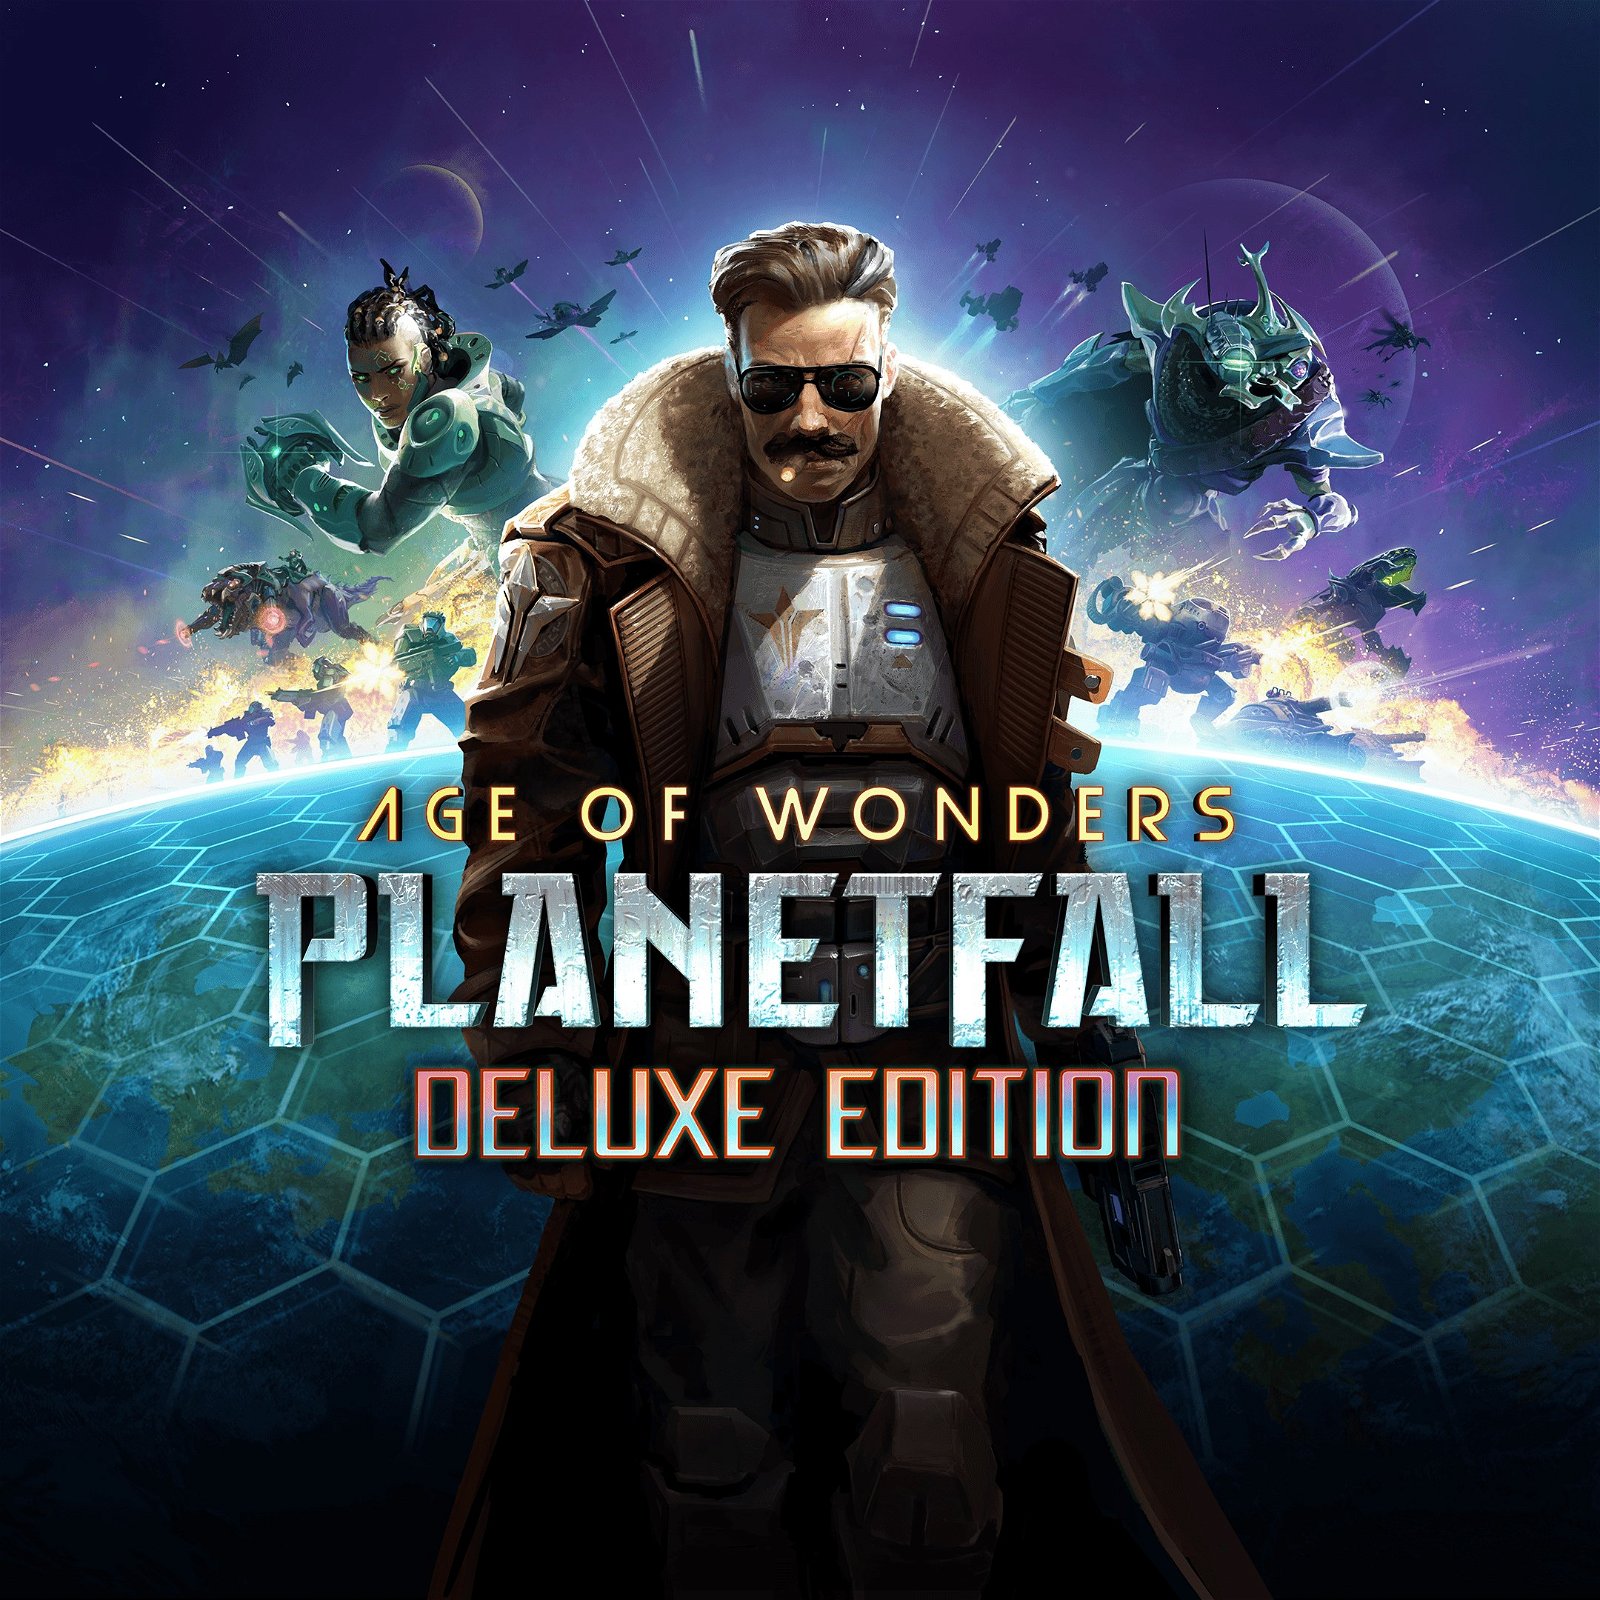 Image of Age of Wonders: Planetfall Deluxe Edition